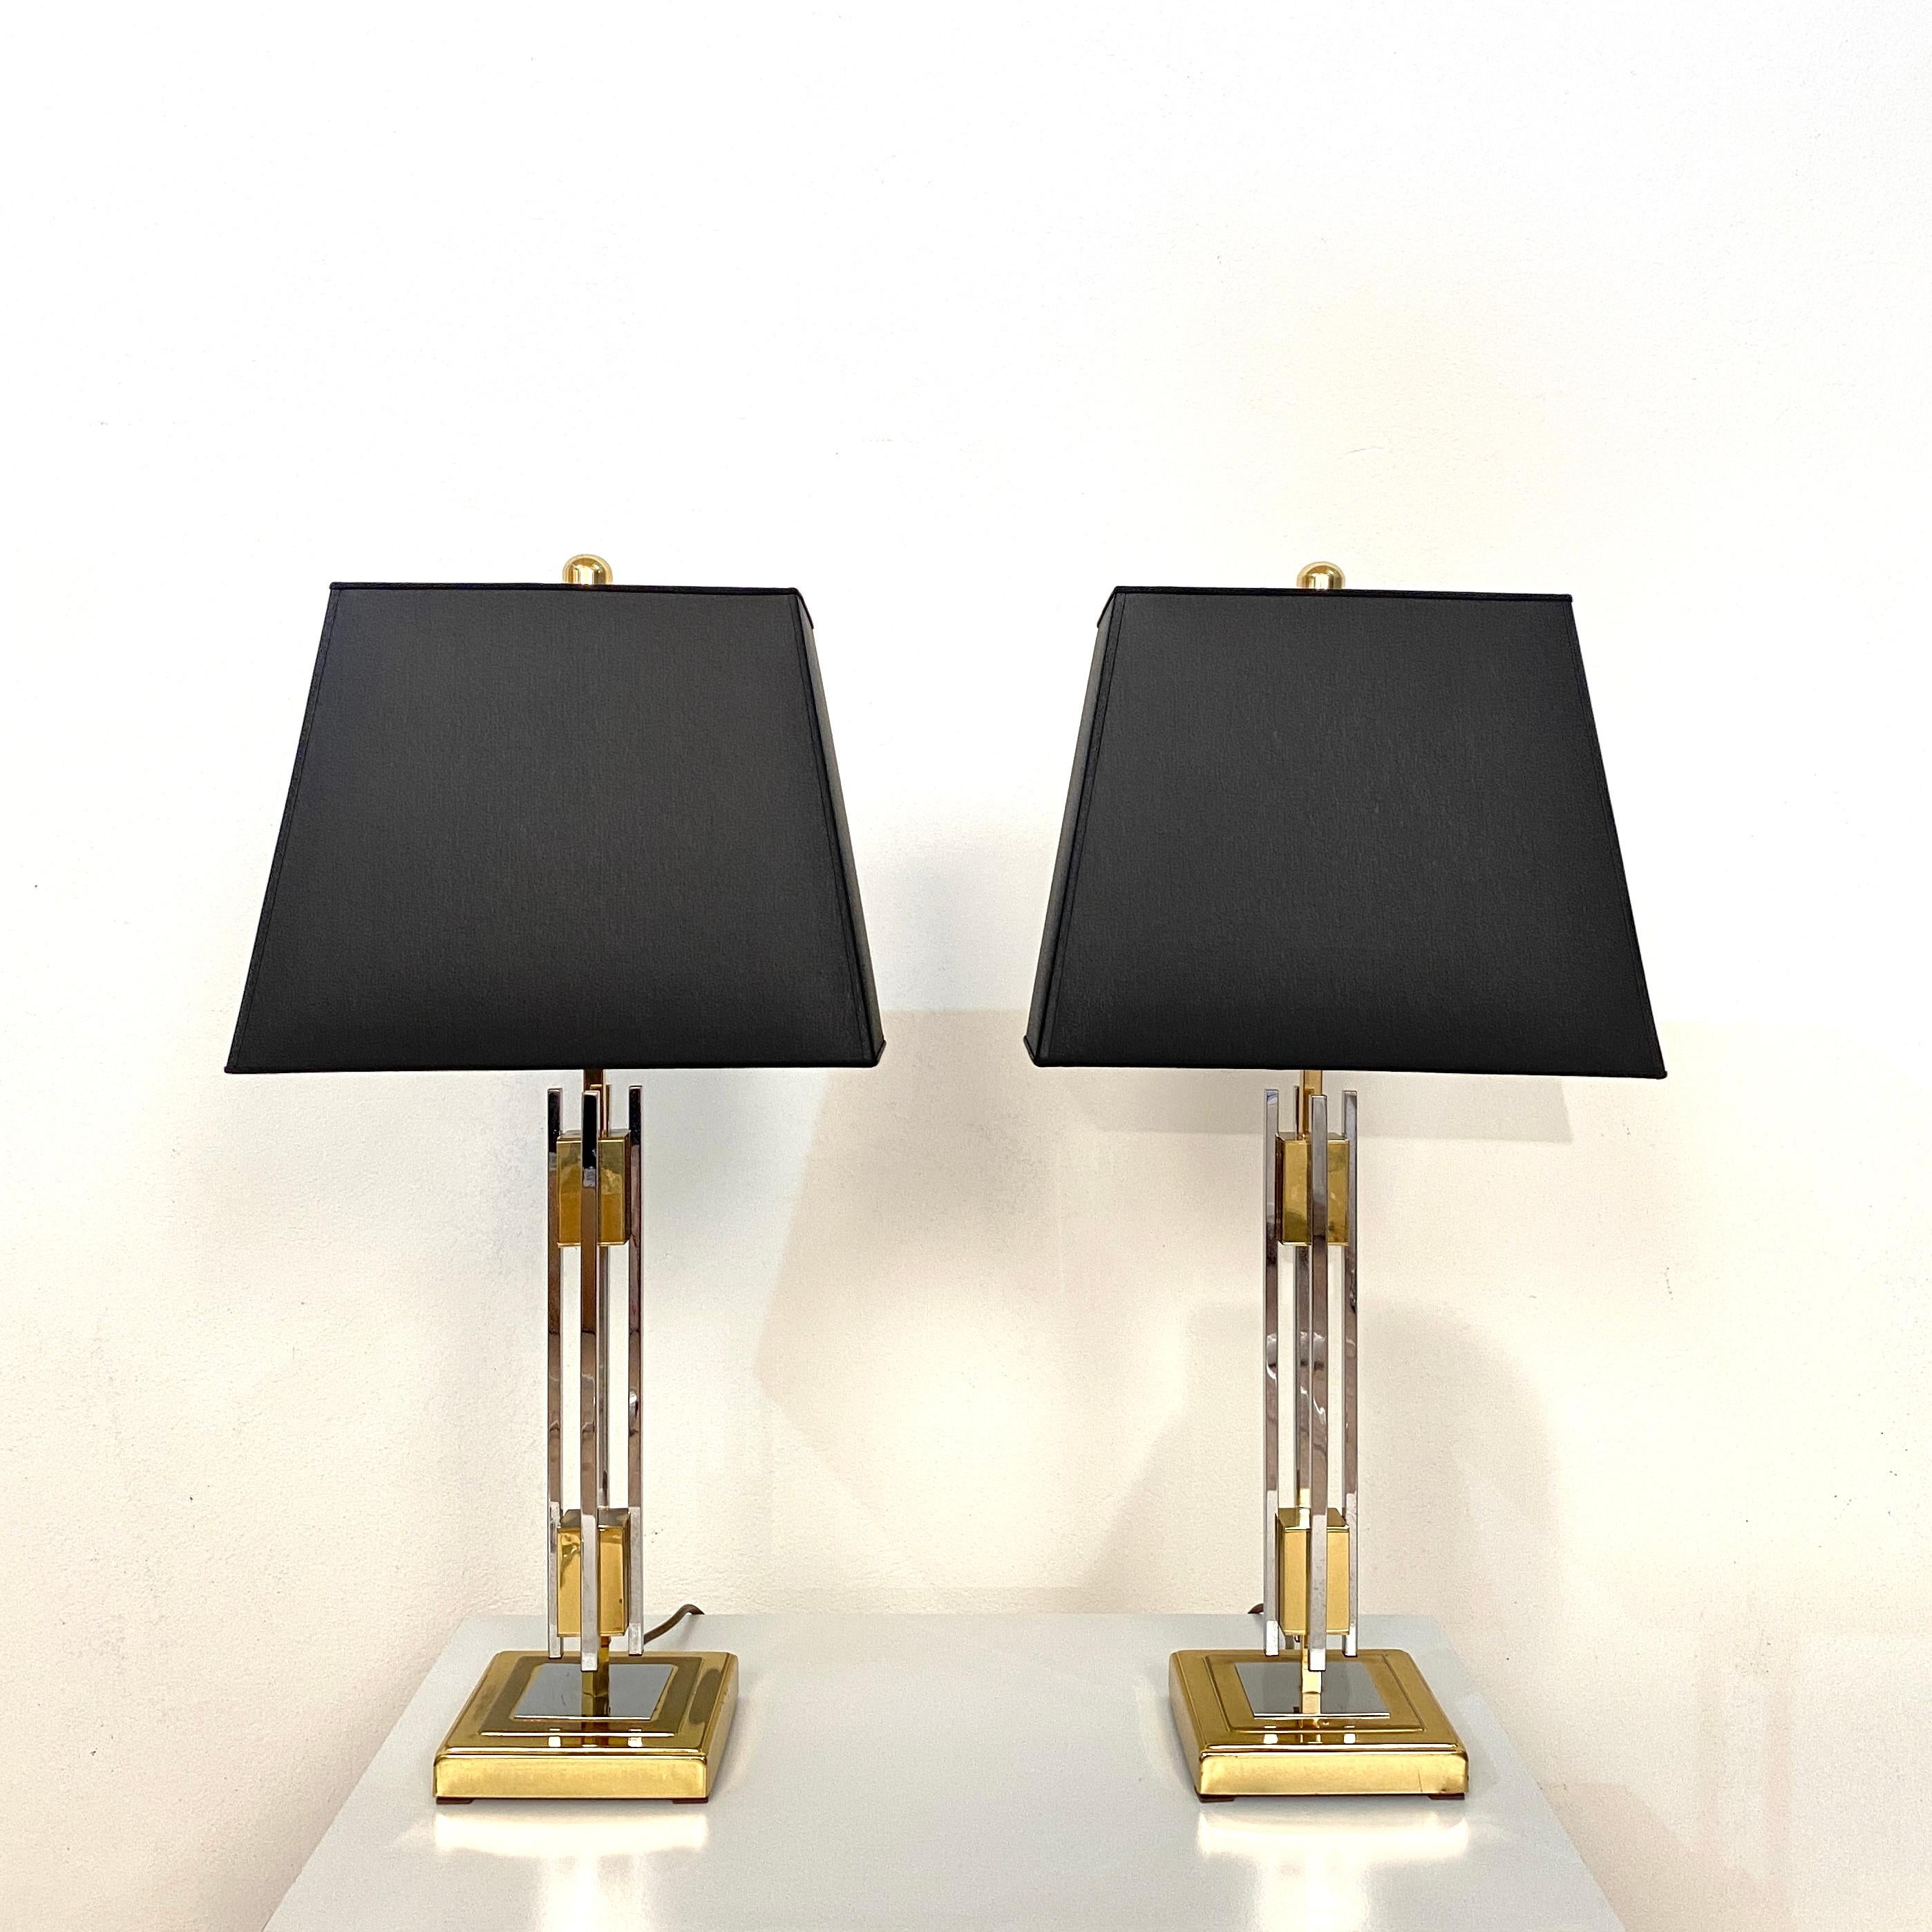 Those elegant and beautiful pair of midcentury gold and chrome table lamps by Willy Rizzo where made in the 1970s.
The lamps are in good vintage condition. One of them has some fading of the gold on the base.
The lamp shades are re-done in black